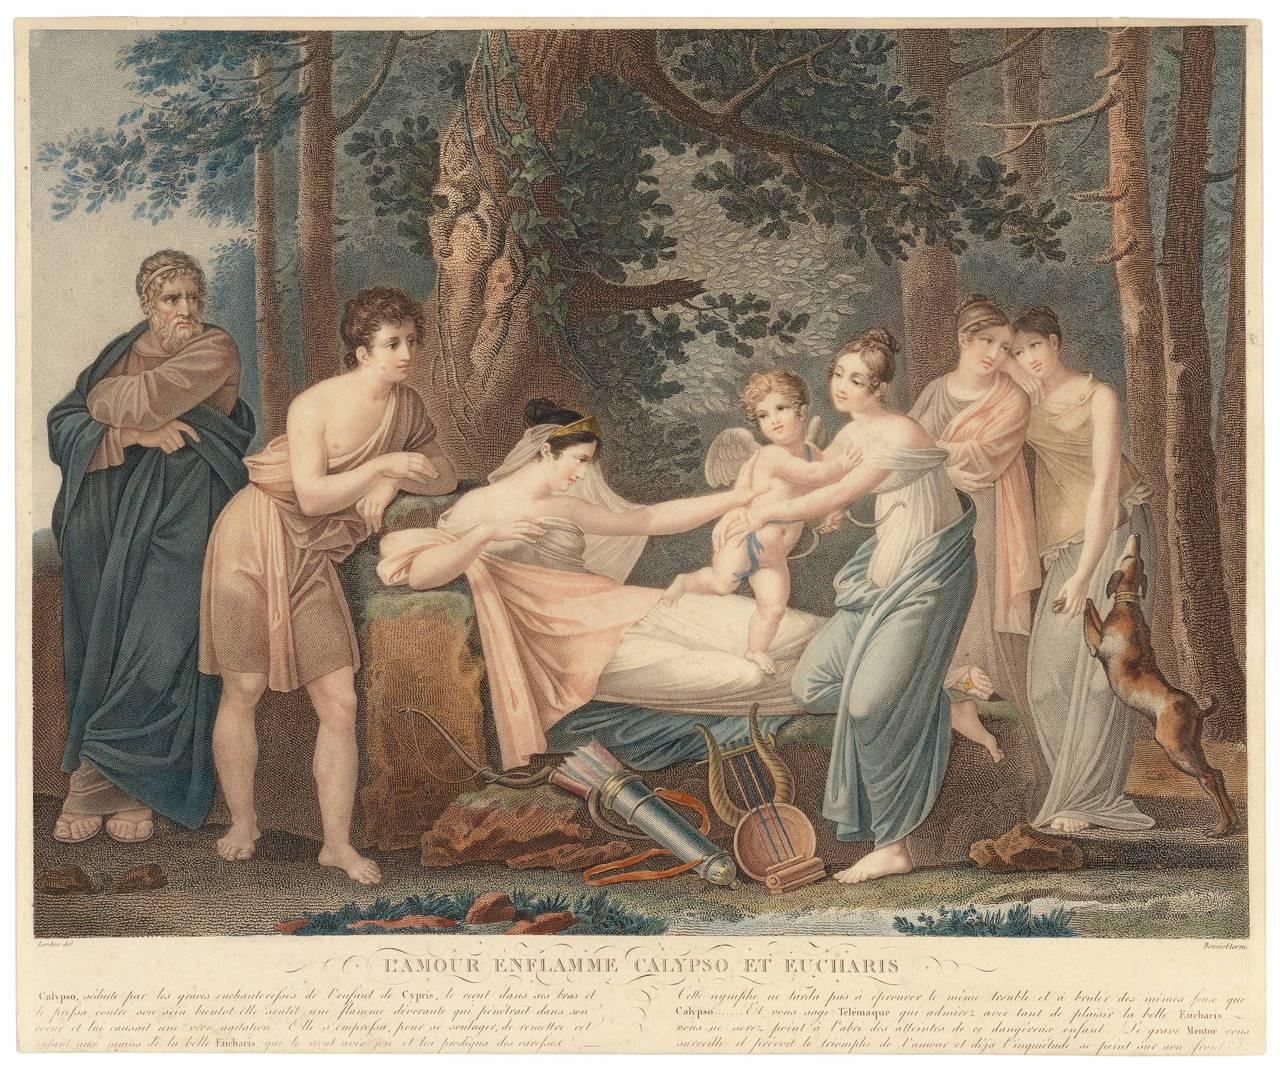 [The Adventures of Telemachus], a set of six original stipple engravings, printed in color and finished by hand at publication, after Pierre-Jérôme Lordon (1780-1838). Printed in Paris by Benoist, Bertrand, et al., circa 1820. Each sheet 15 1/4 x